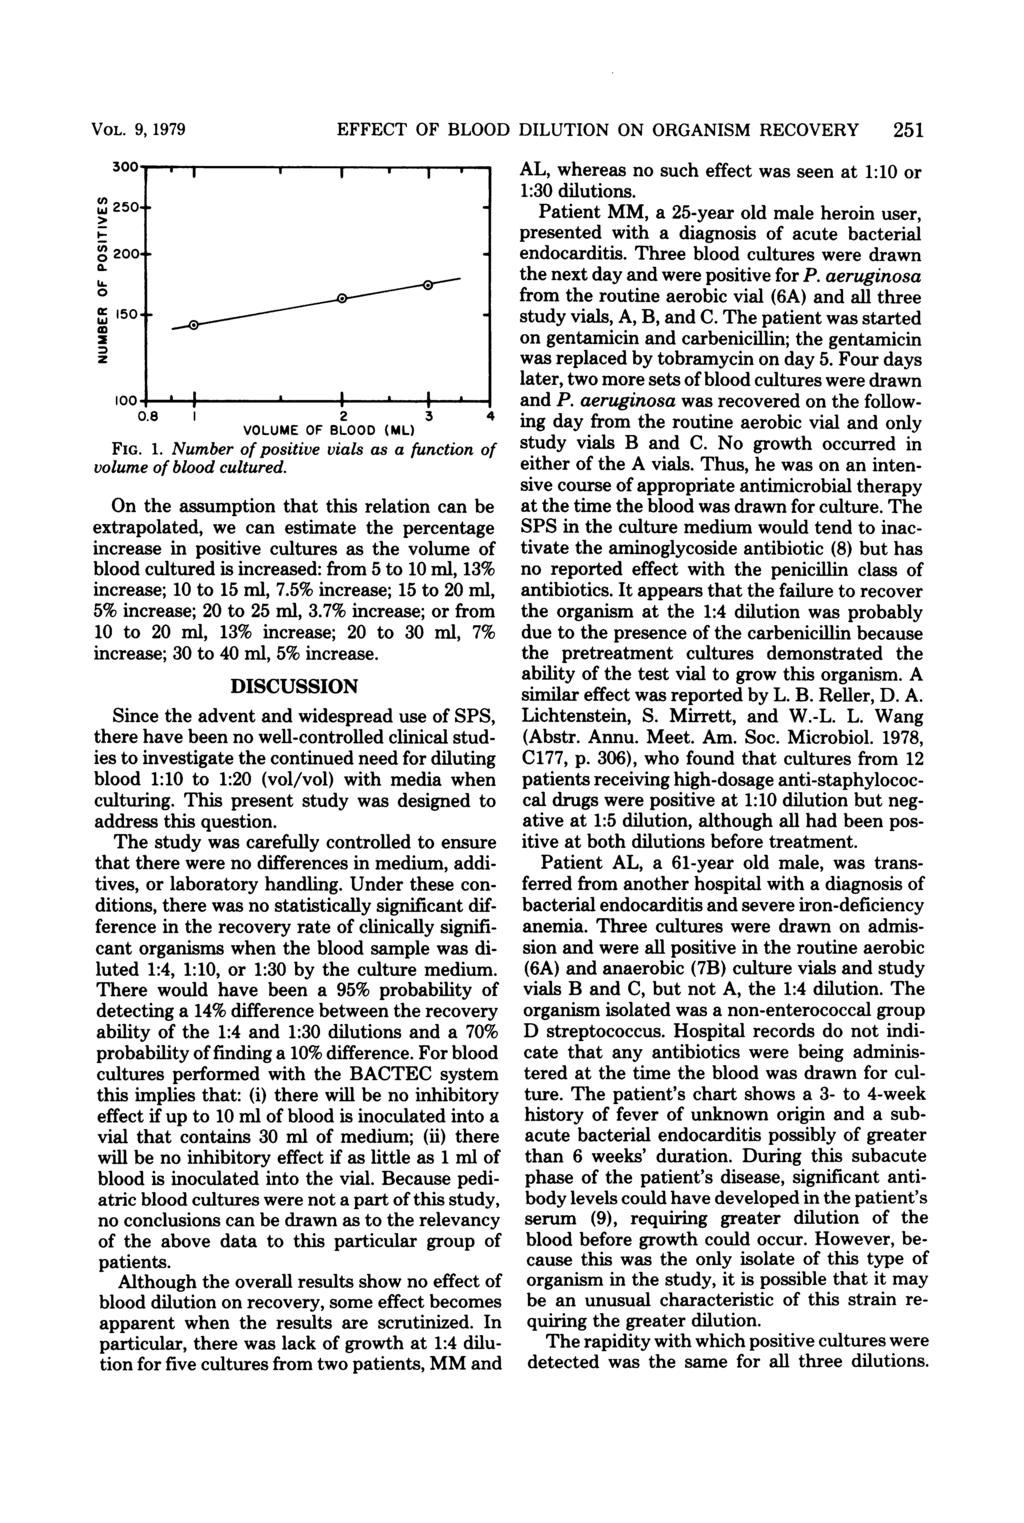 VOL. 9, 1979, 250'.- U) O 200 (L. 0 r 150.+ w 0 I I I I v A I a I. I 0.8 2 3 4 VOLUME OF BLOOD (ML) FIG. 1. Number of positive vials as a function of volume of blood cultured.